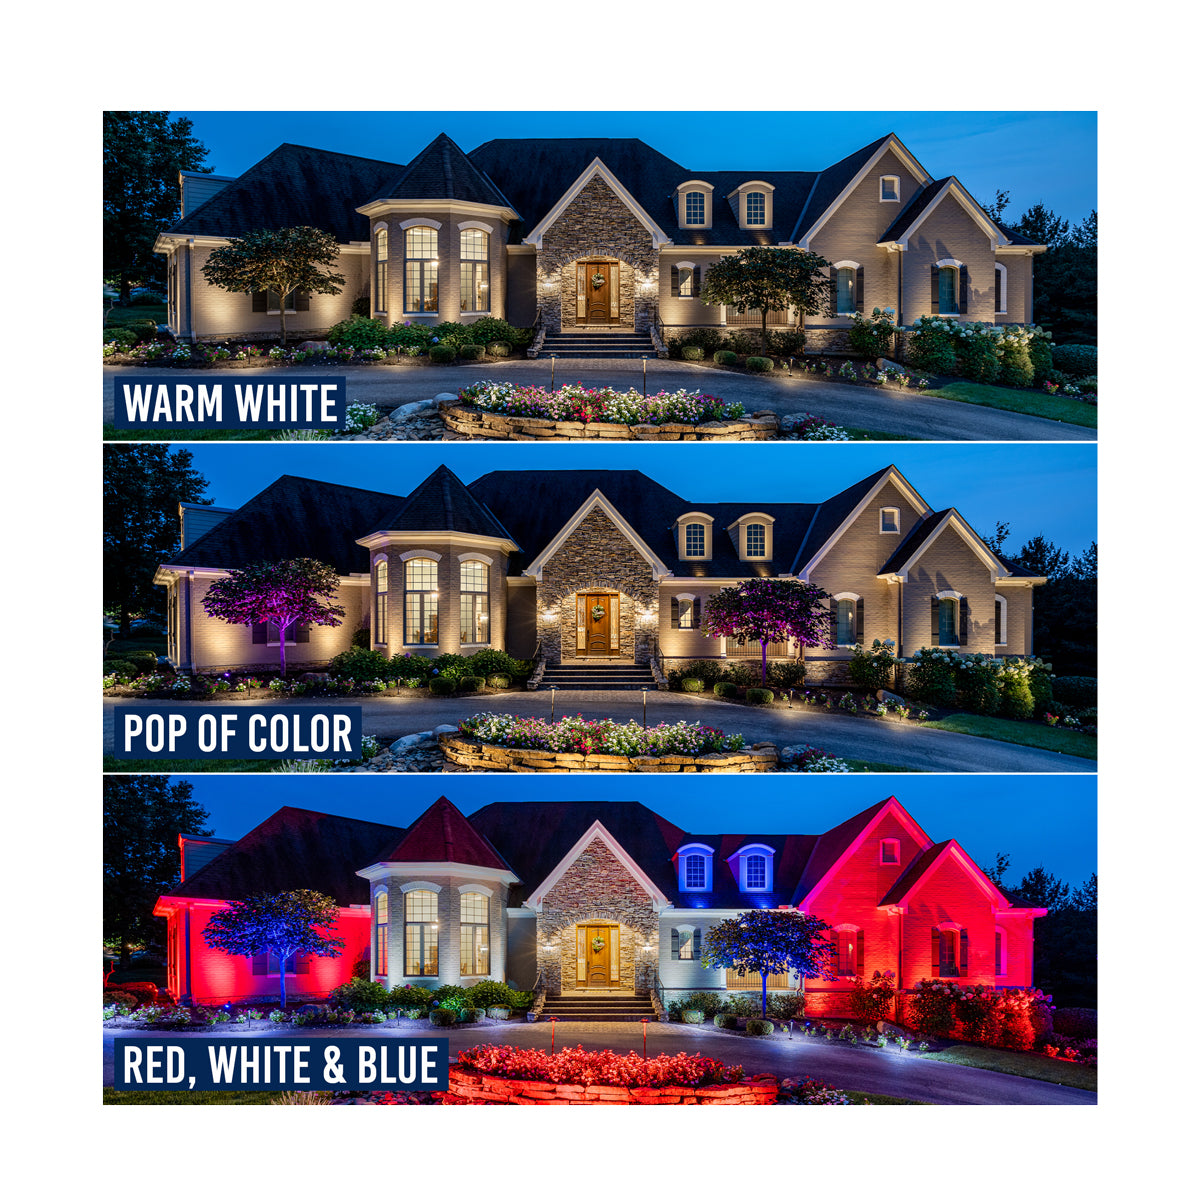 Outdoor LED lighting shown in multiple colors for holidays